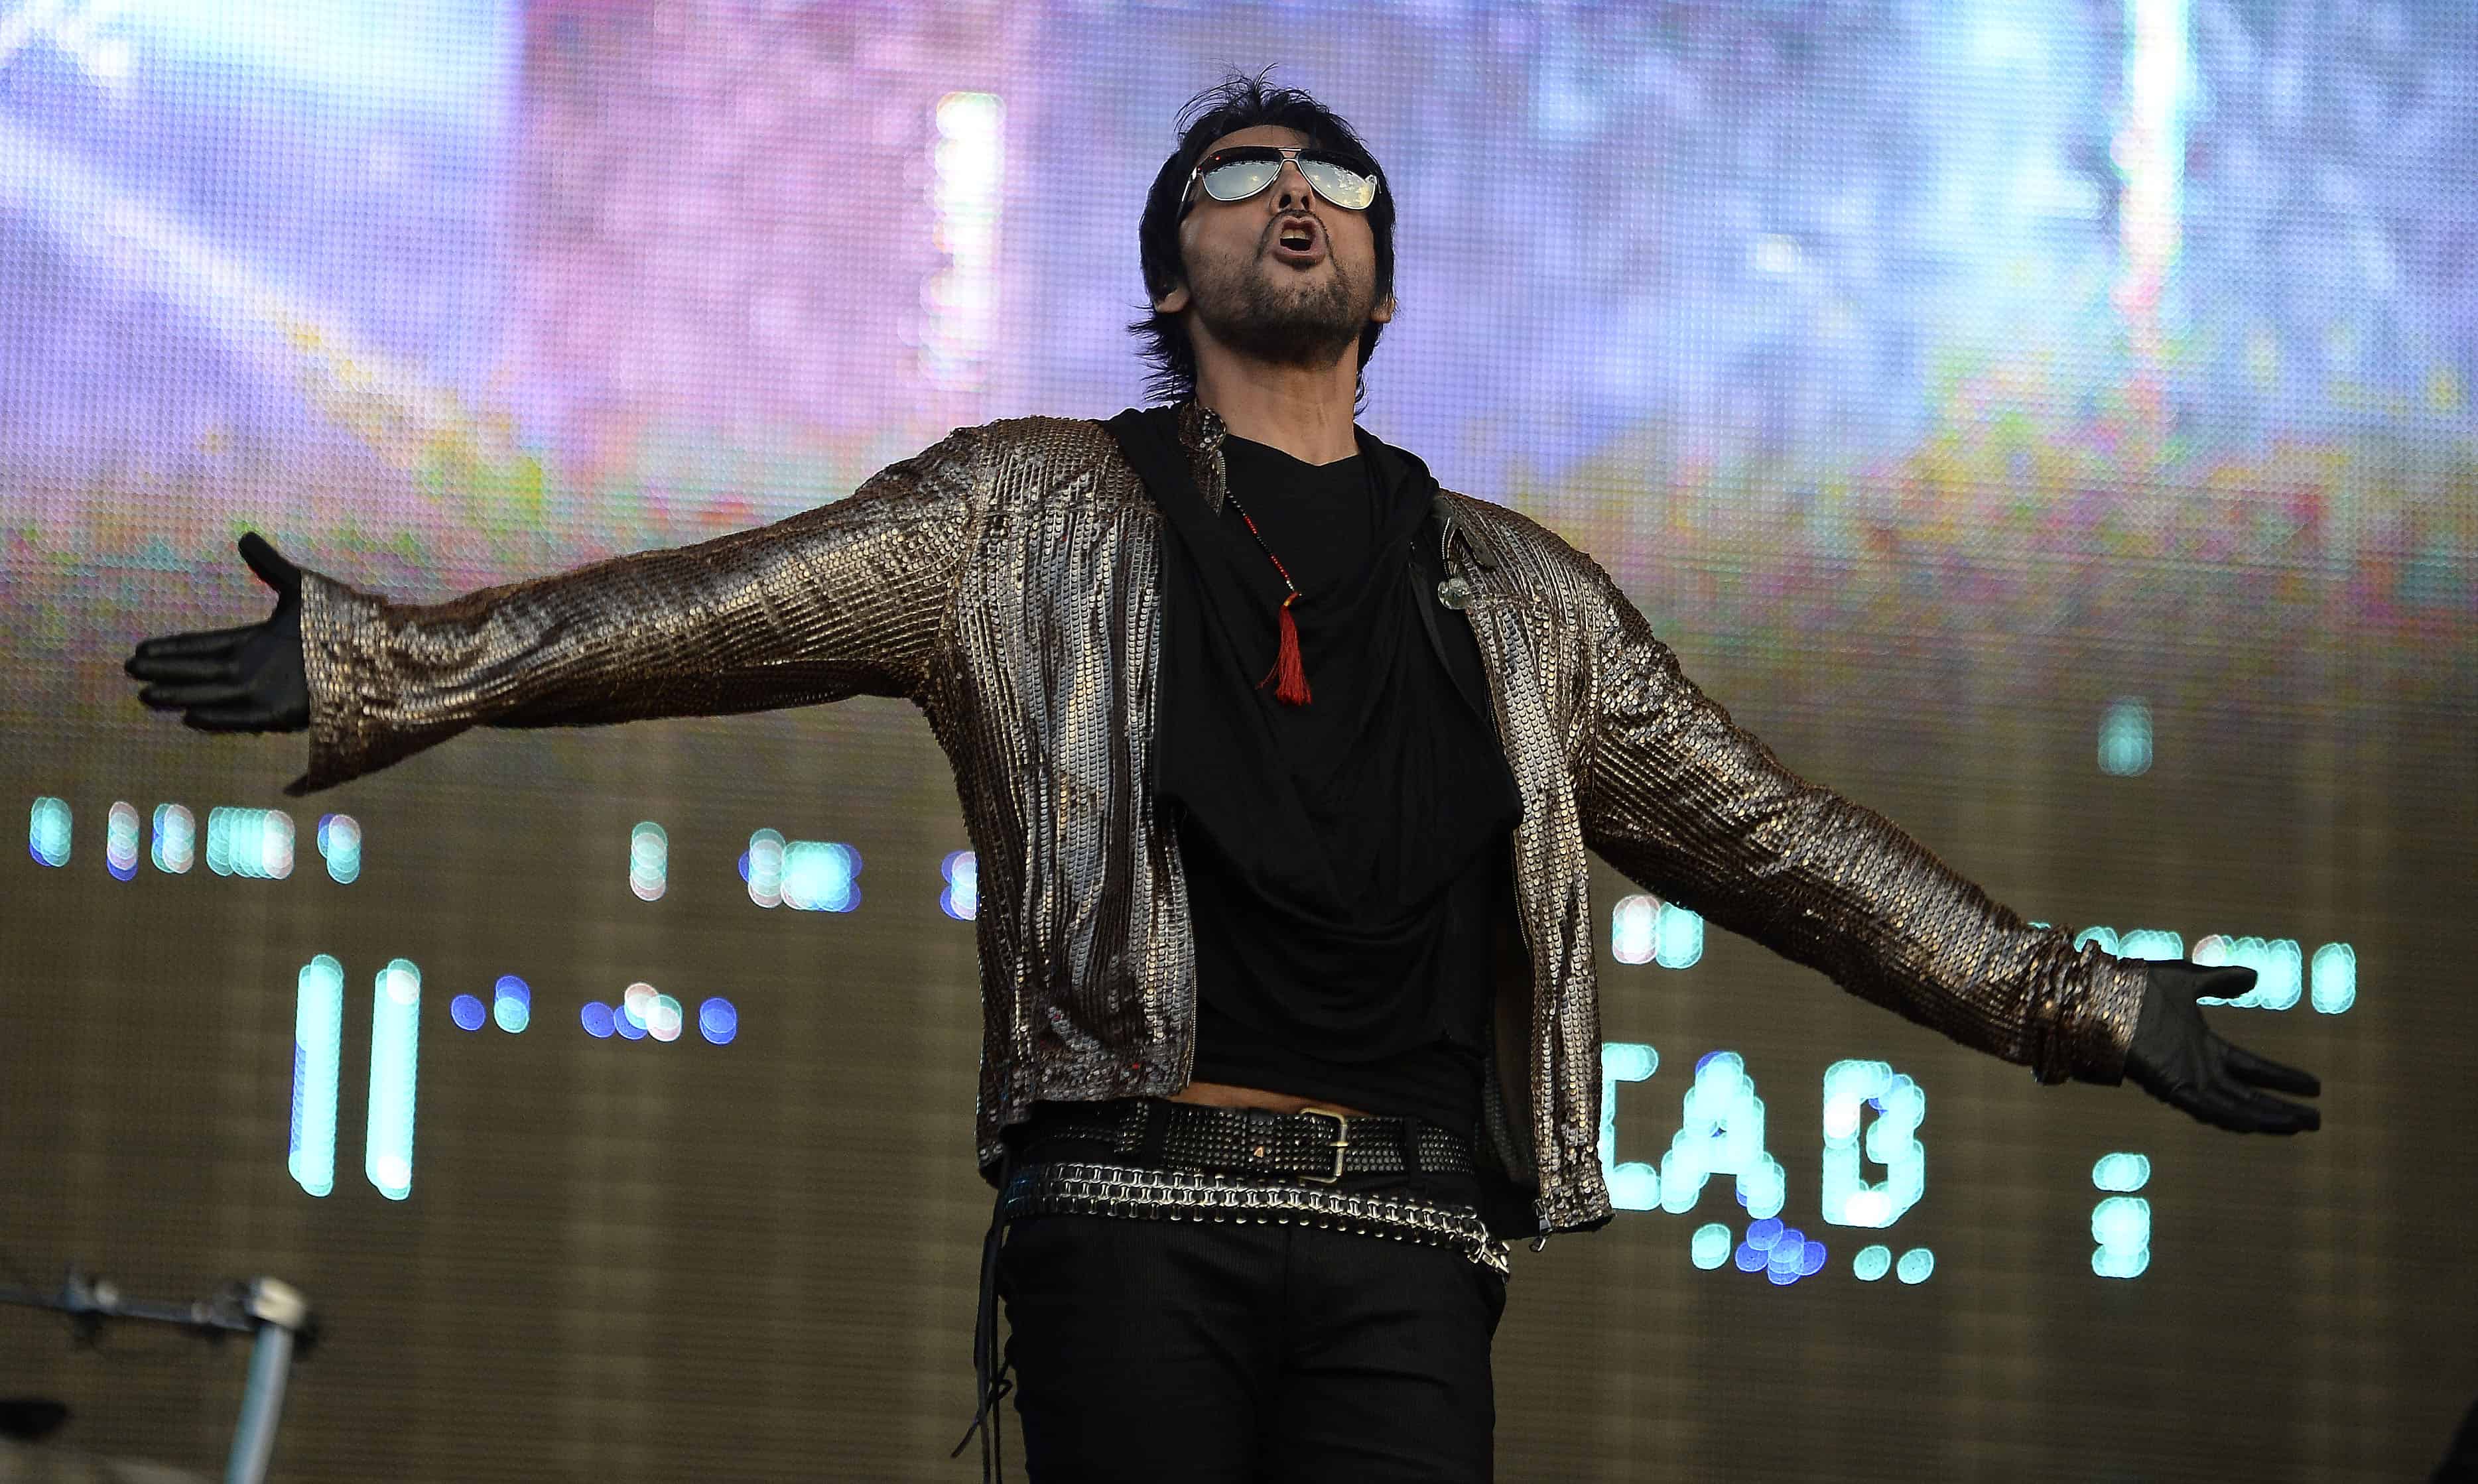 Beto Cuevas of Chilean rock band La Ley performs during the fourth day of the Vive Latino music festival at the Foro Sol in Mexico City, on March 30, 2014.